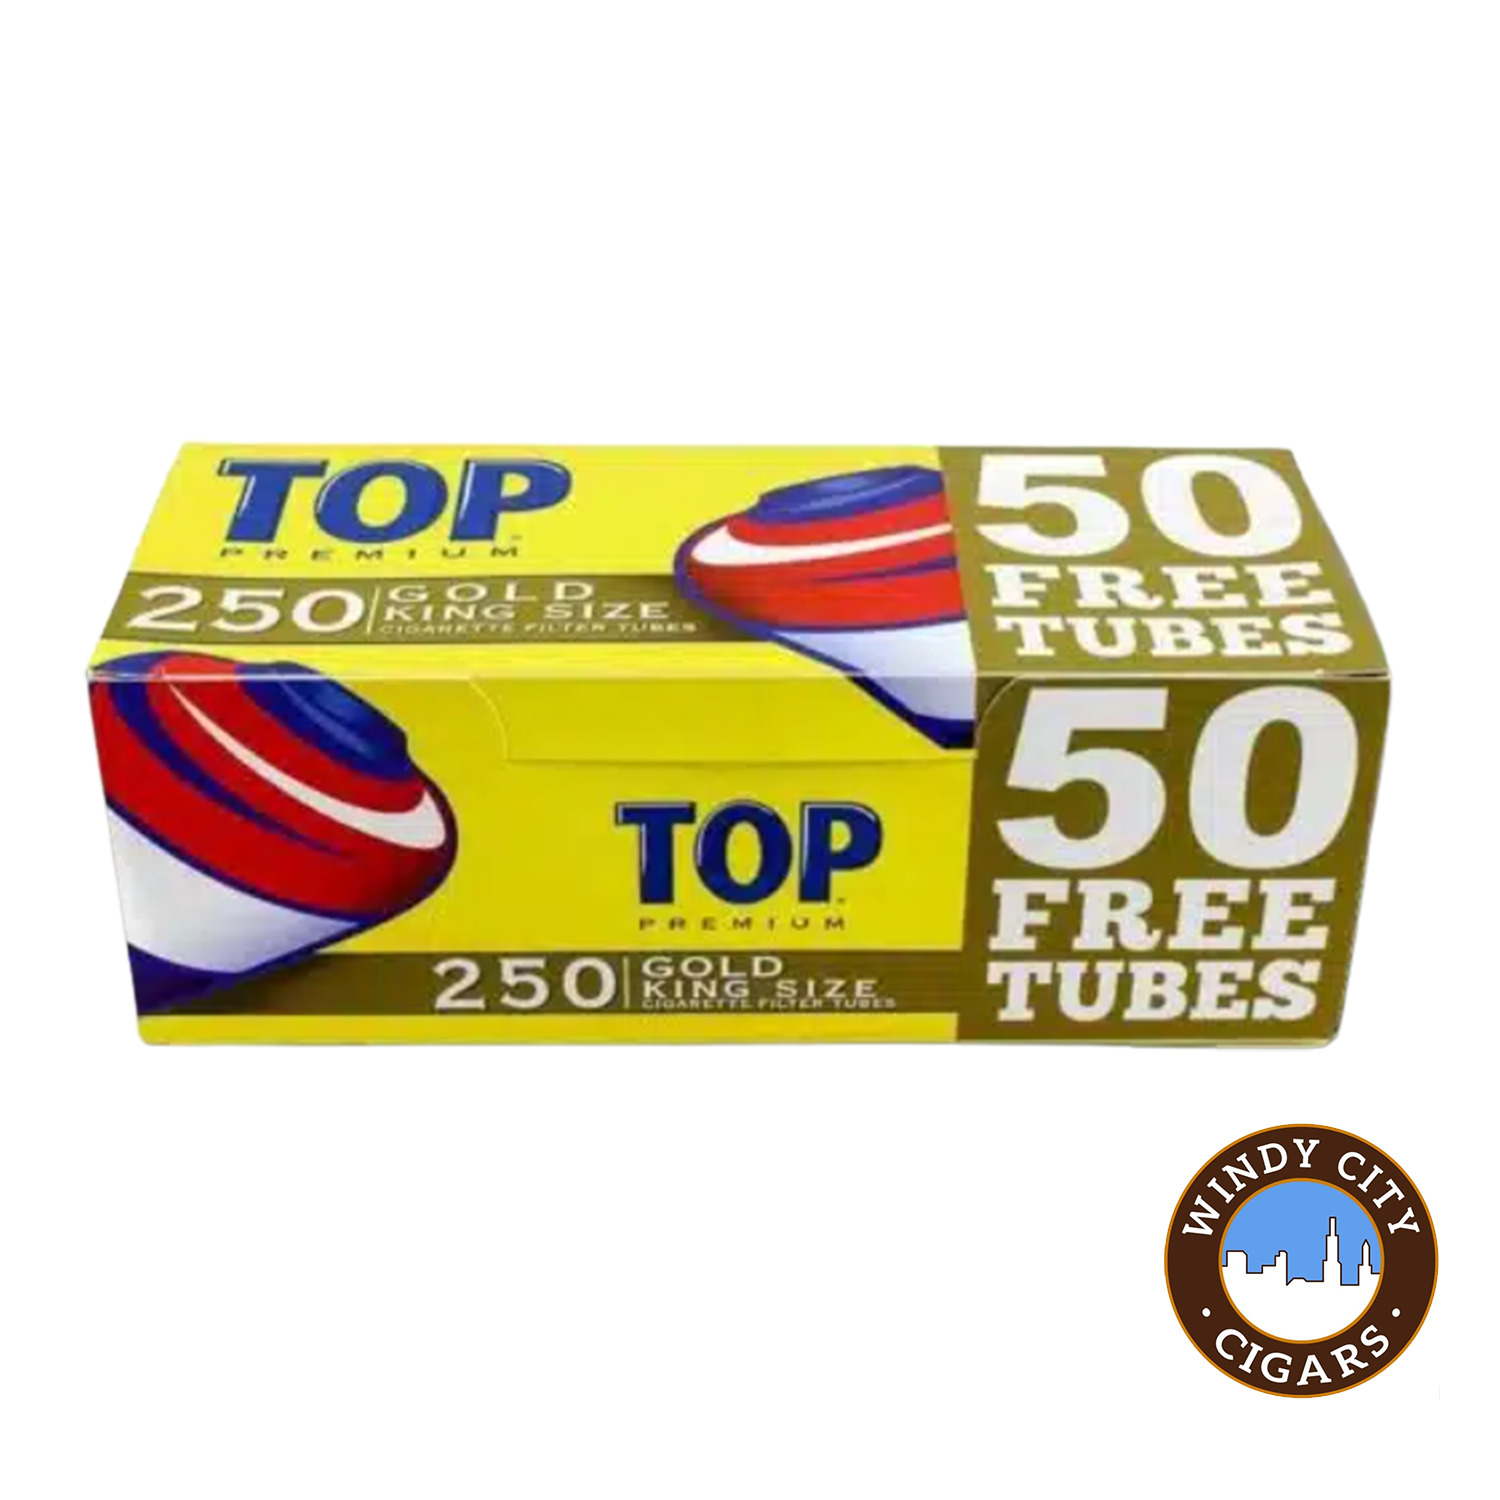 Top Gold King Cigarette 250ct Tubes- 4 Boxes